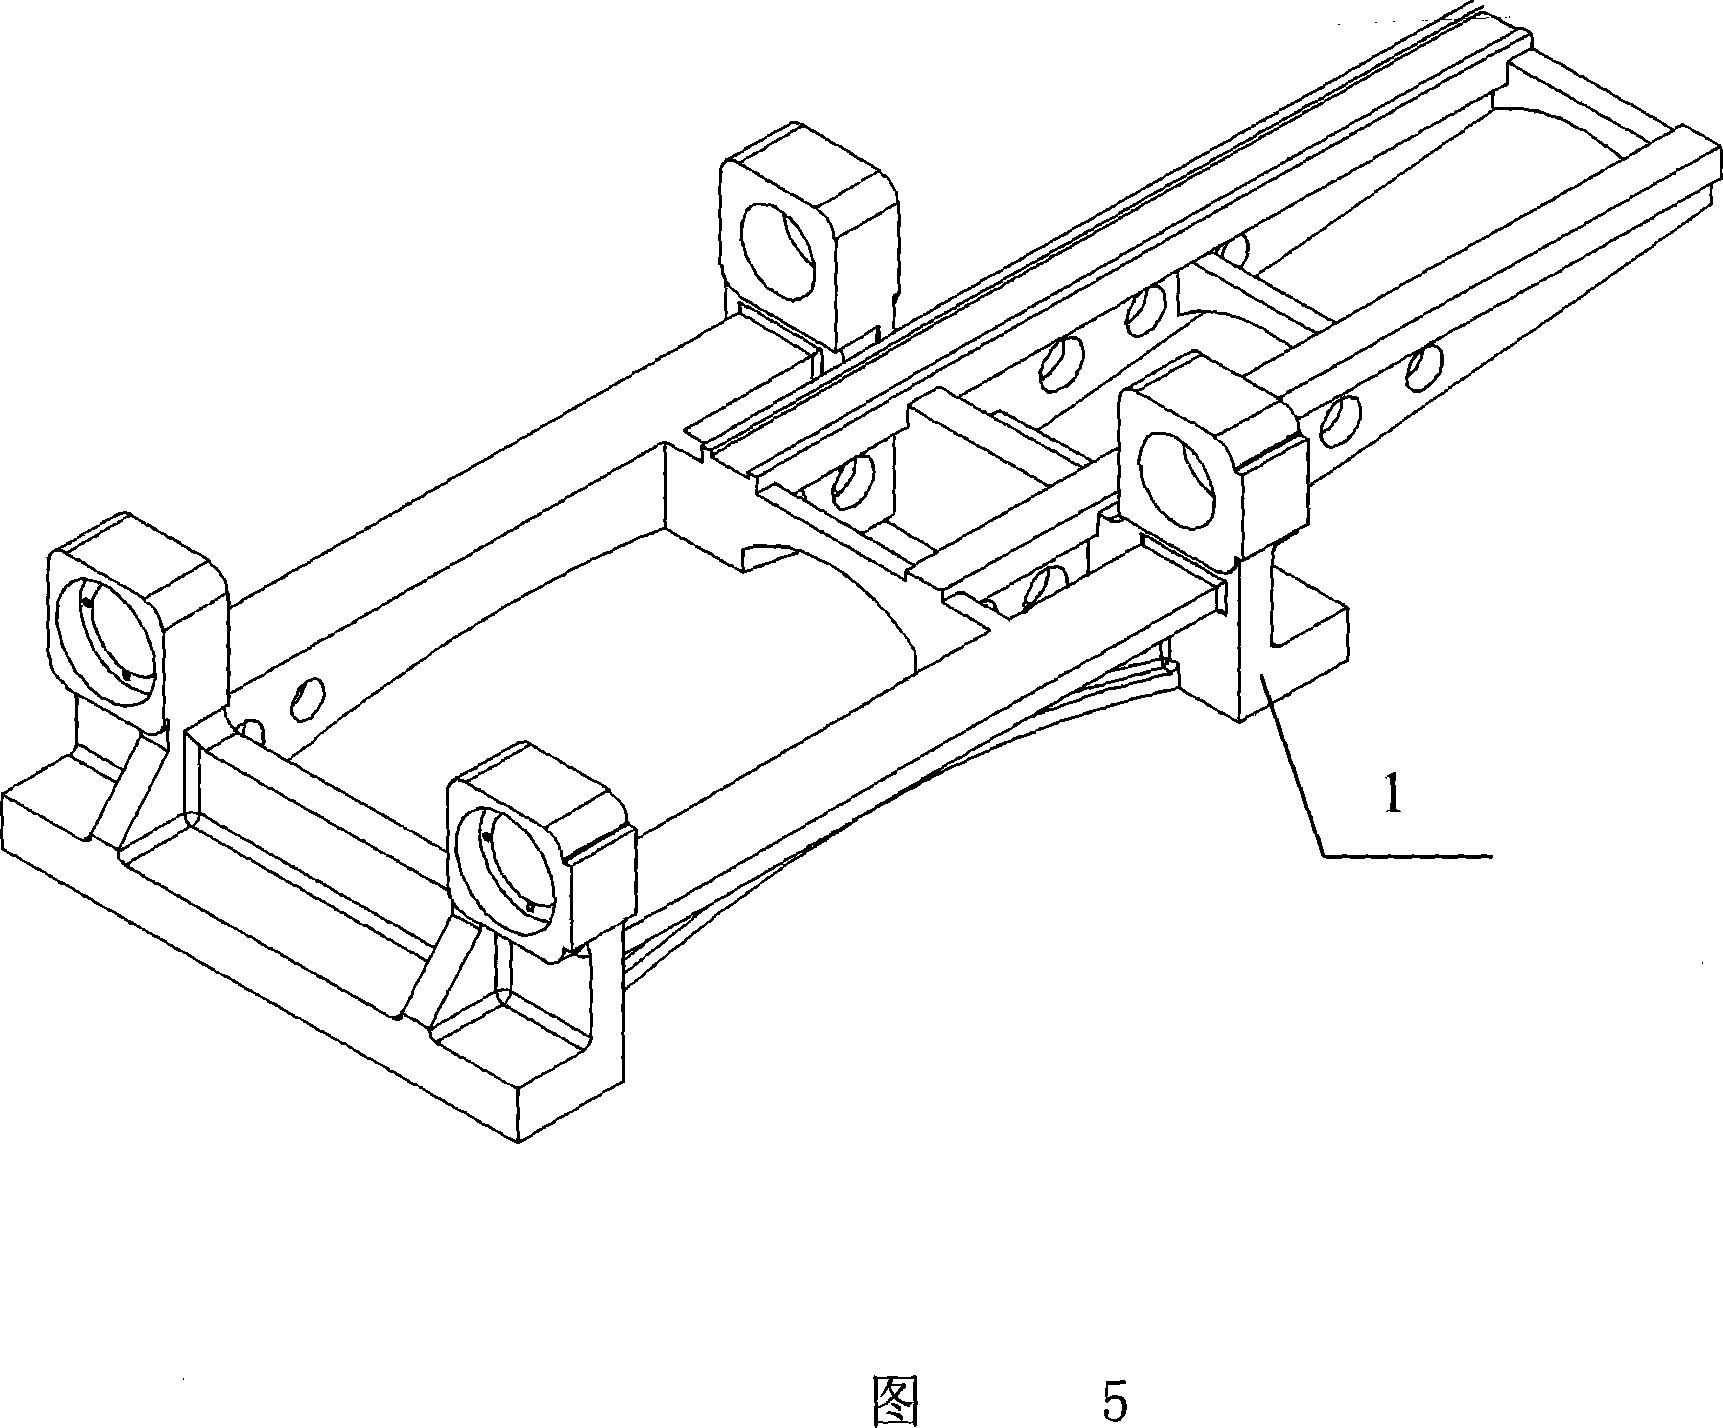 Injection mechanism for injection machine